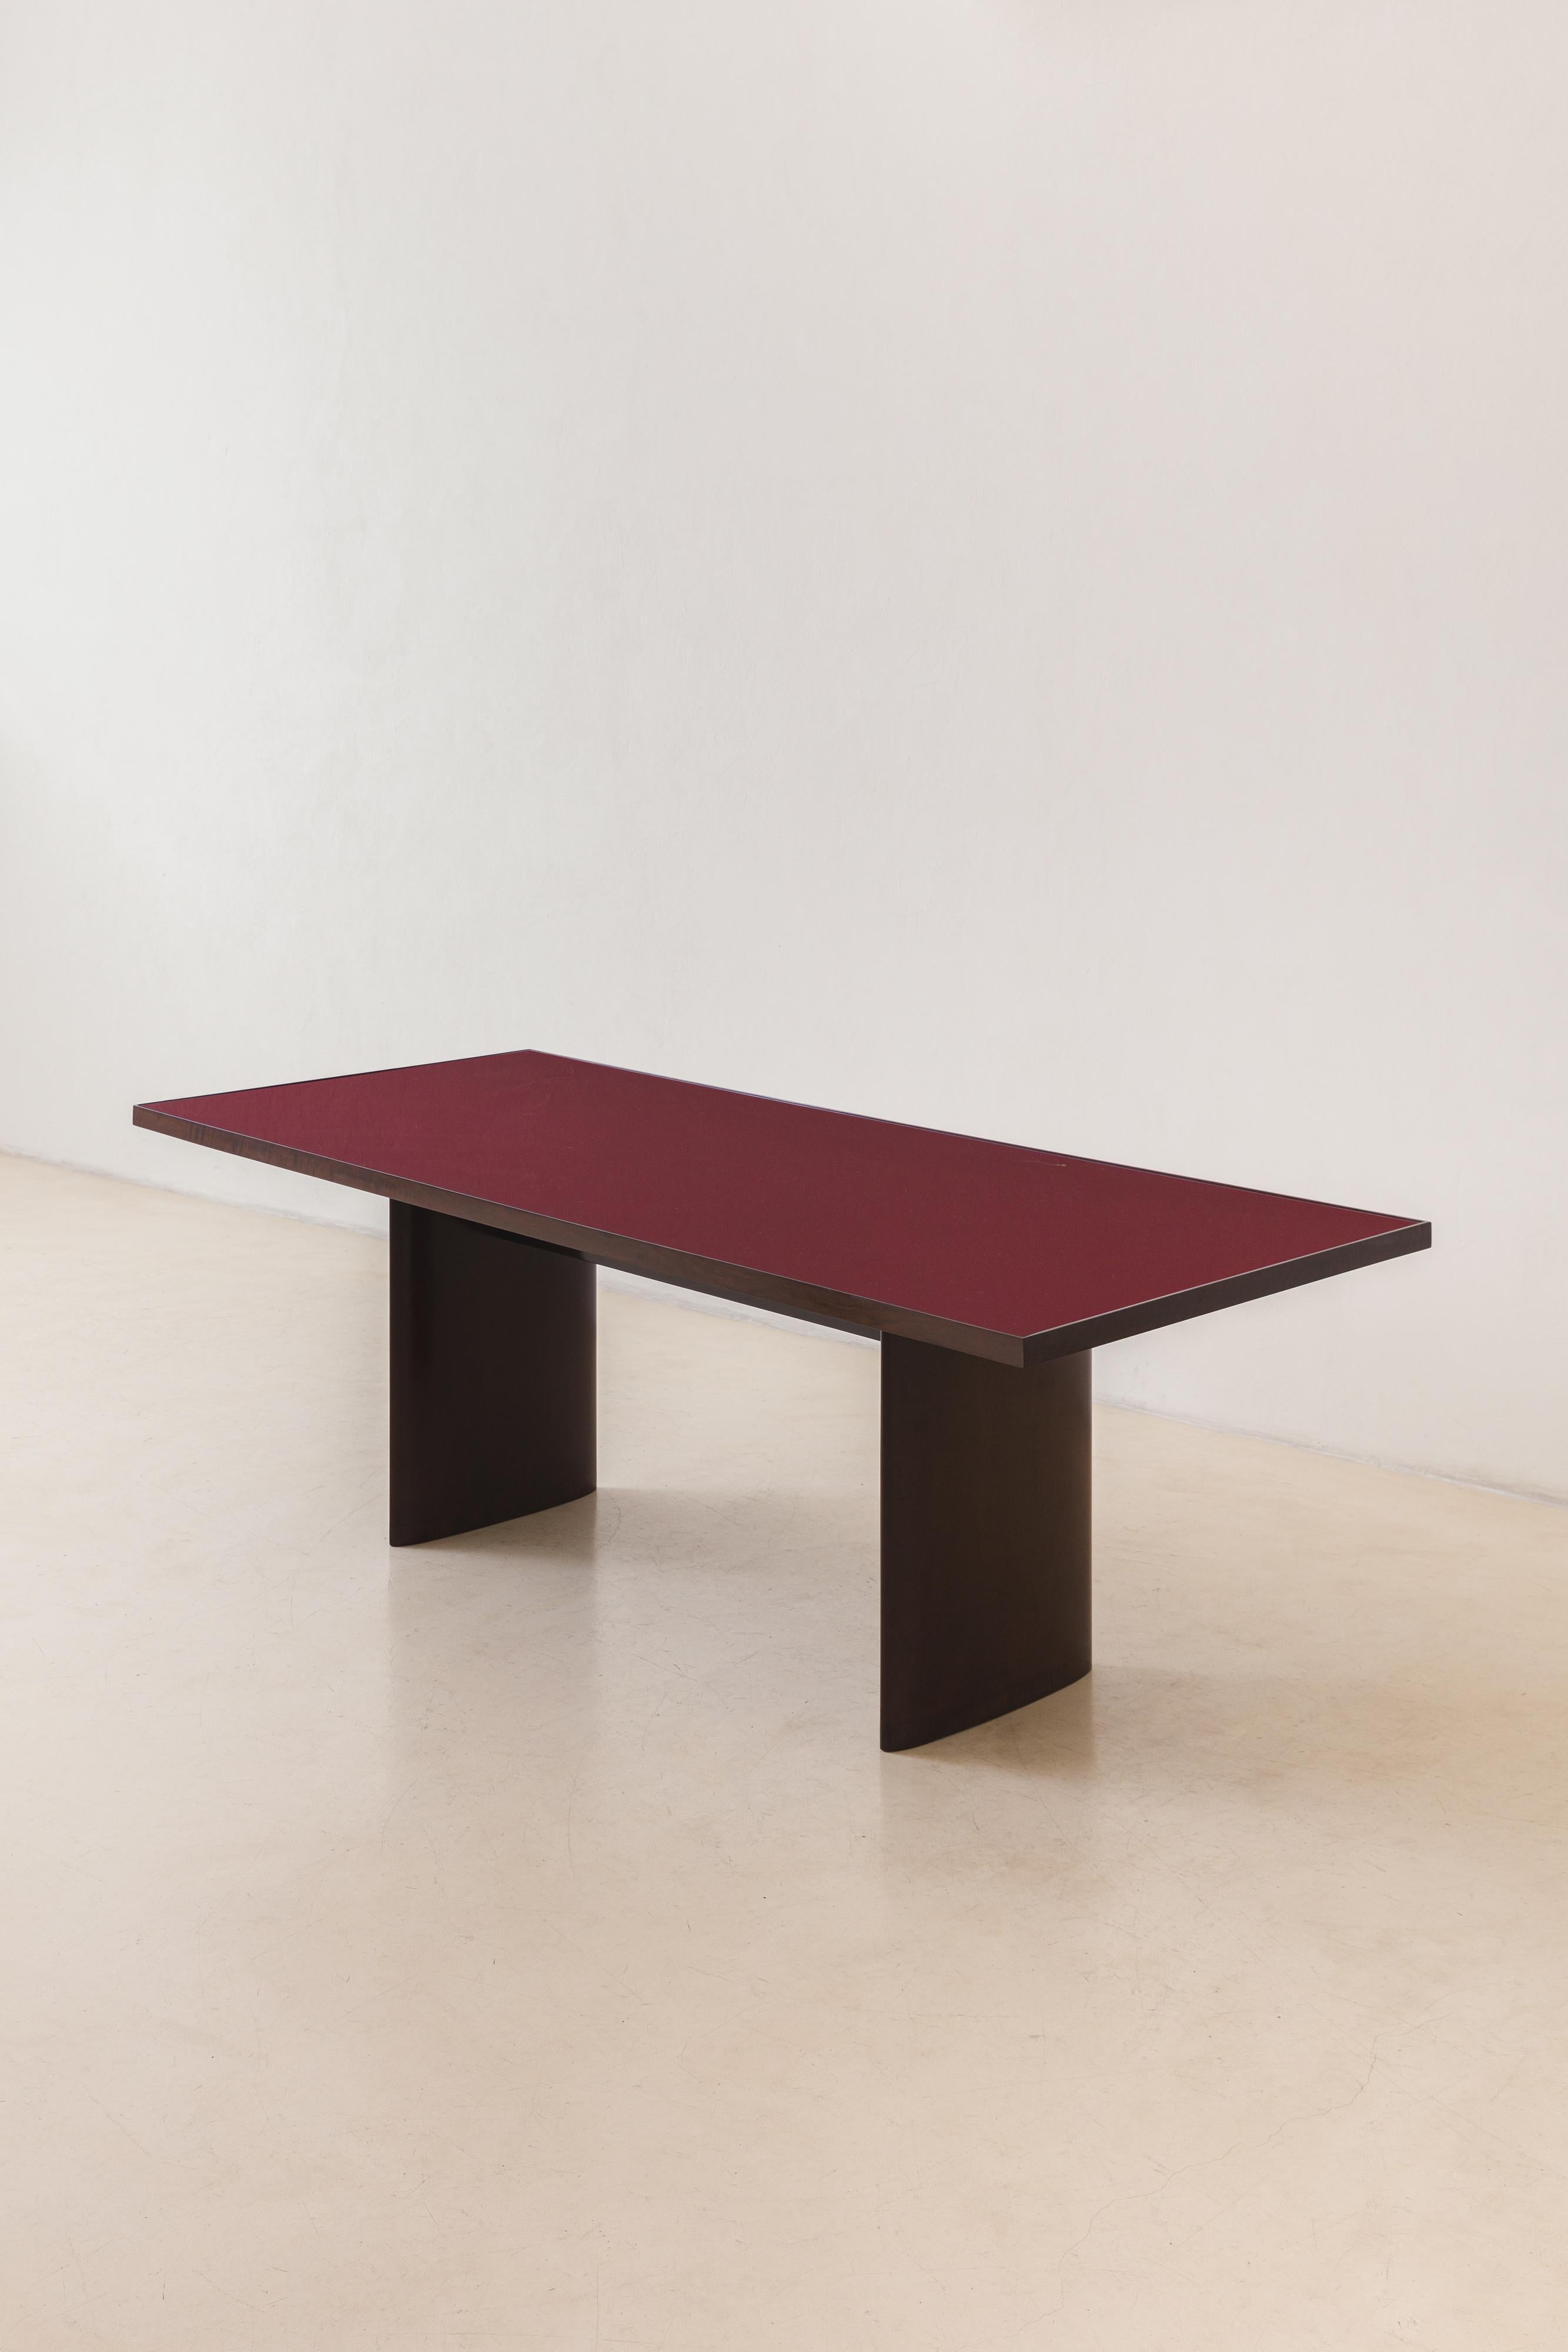 Mid-Century Modern Solid Imbuia with Red Glass Top Dining Table by Joaquim Tenreiro, Brazil C. 1949 For Sale